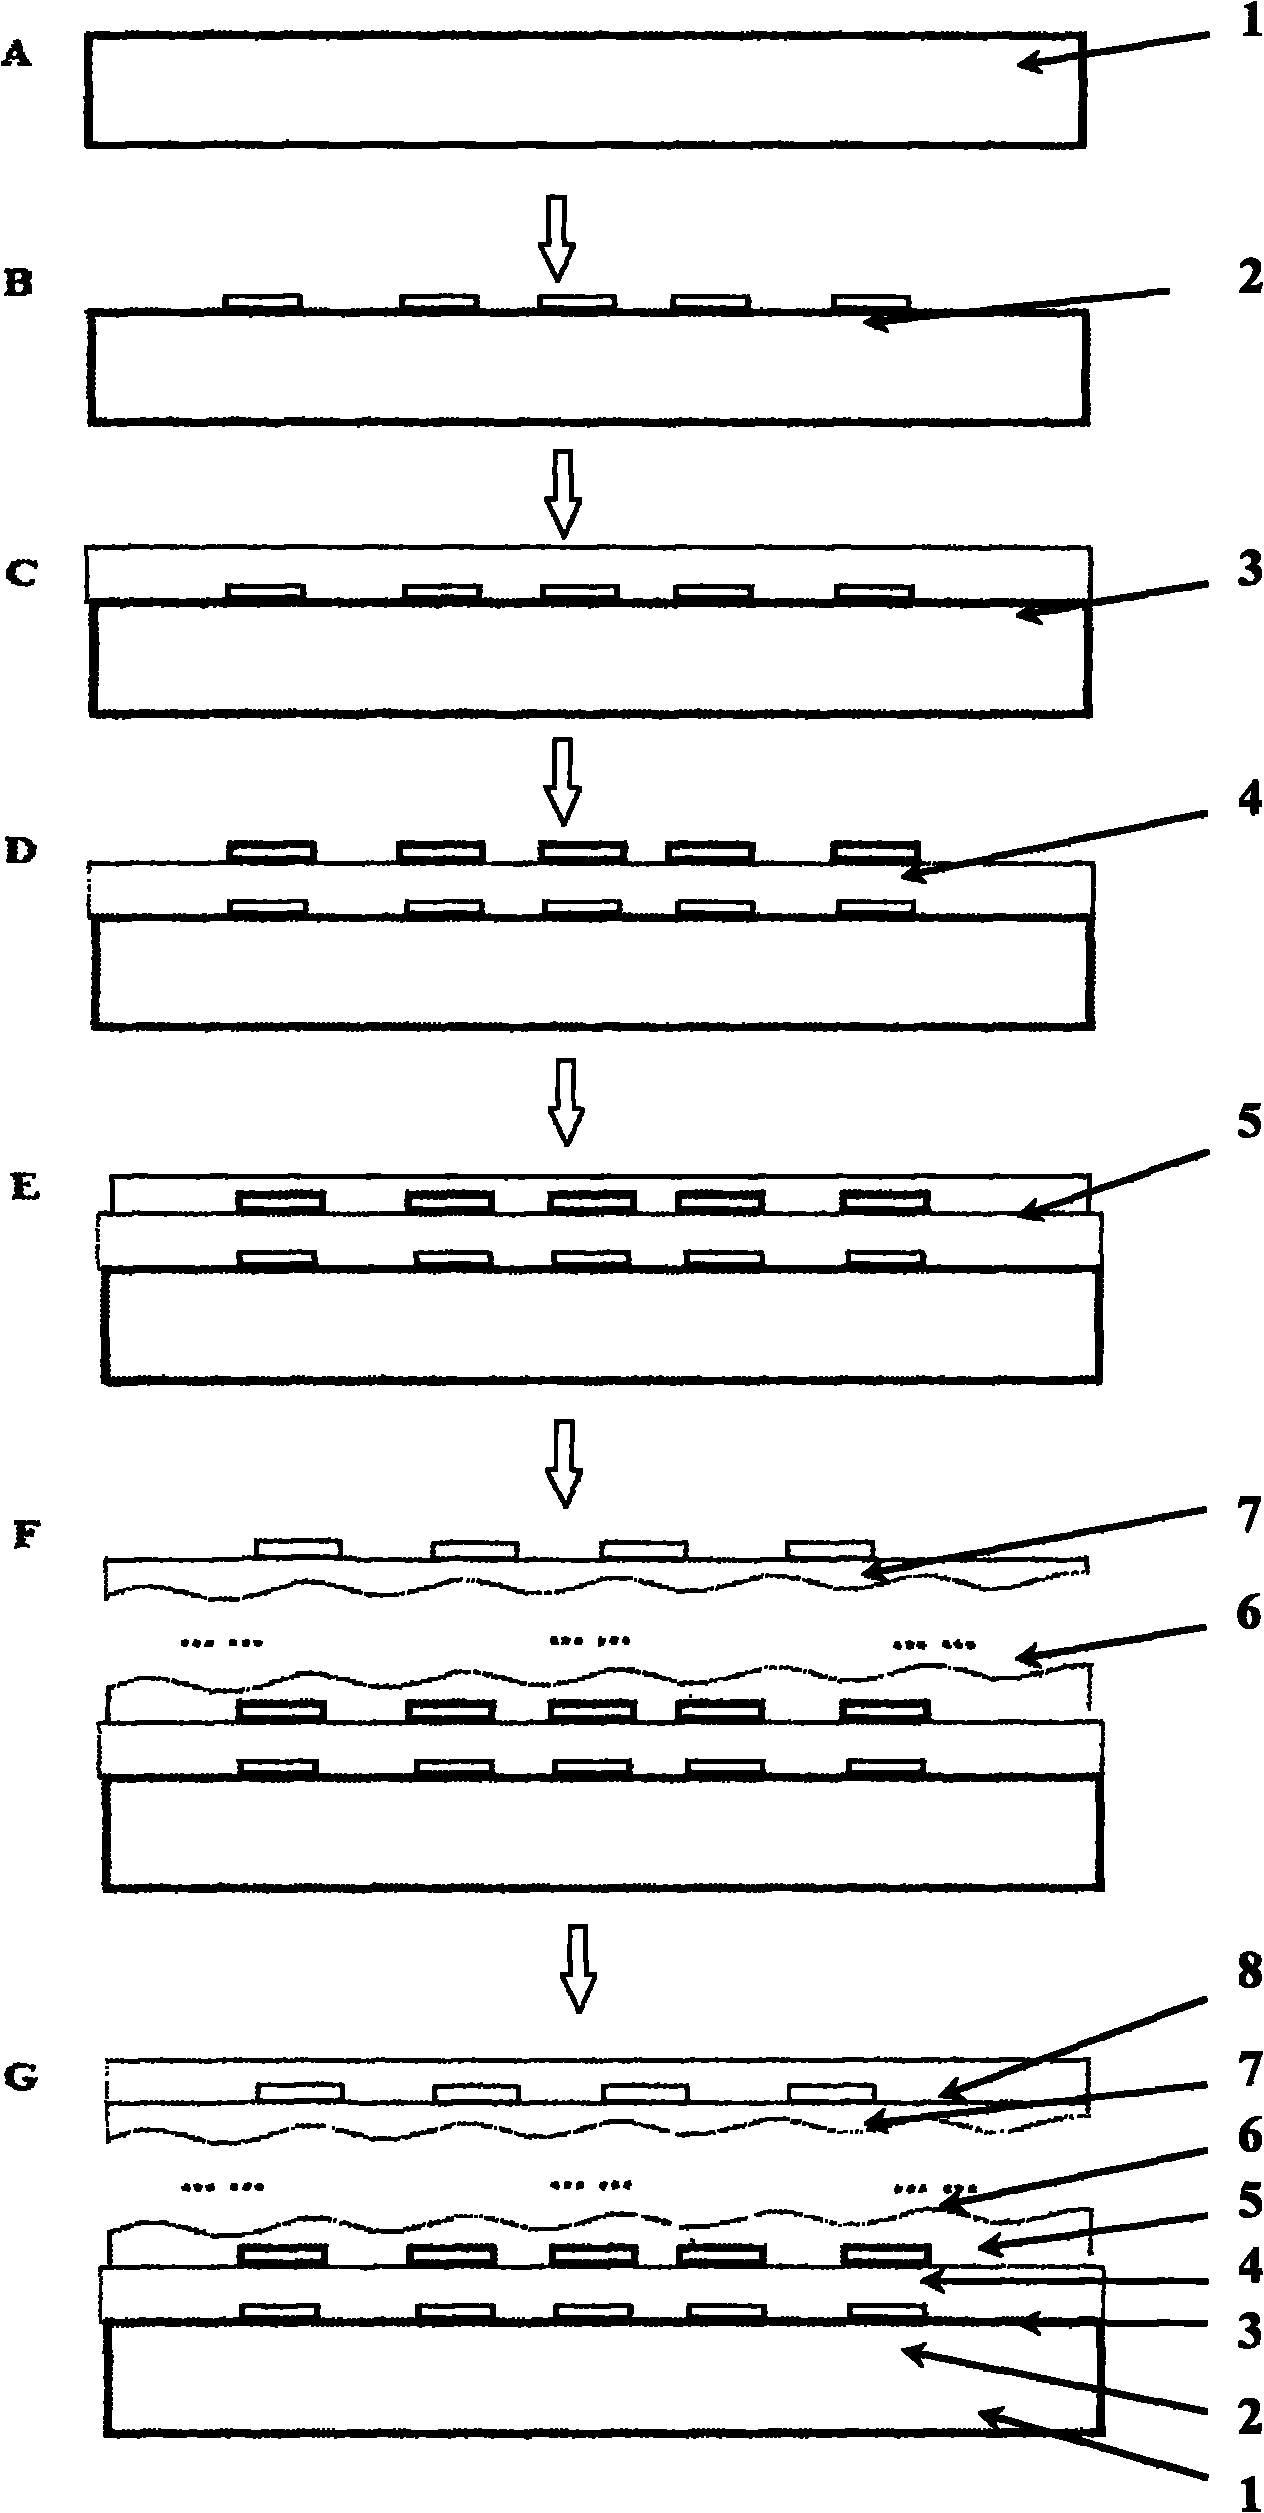 Multilayer electromagnetism modulating structure and preparation method thereof